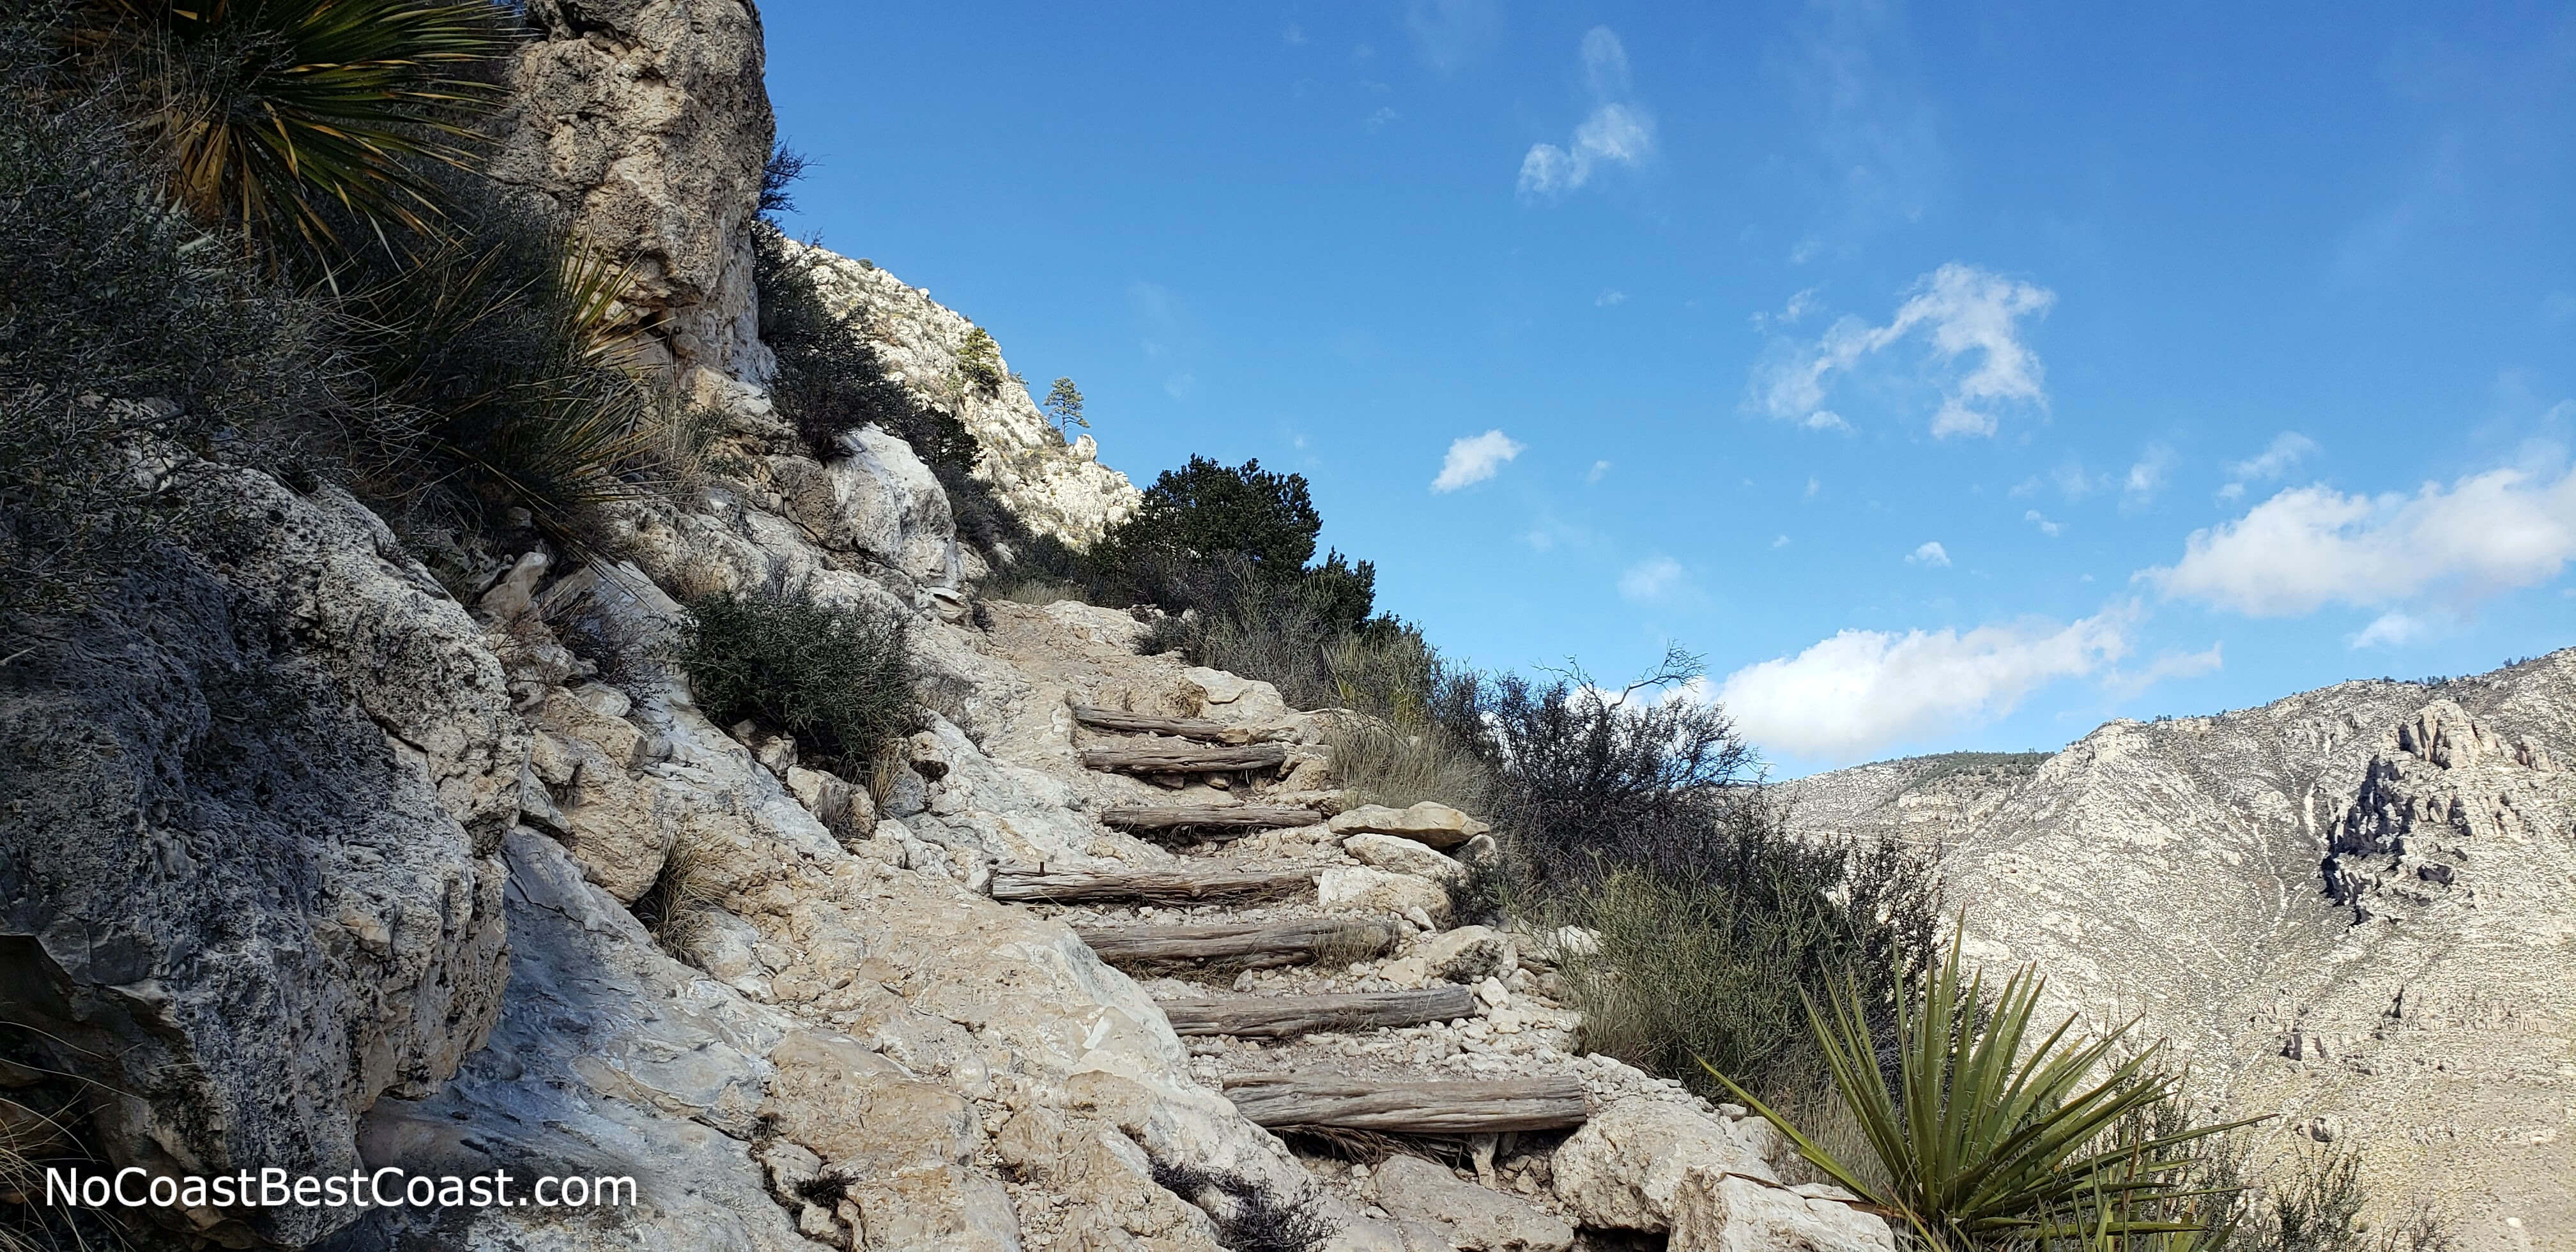 Wooden steps are common on the first part of the trail